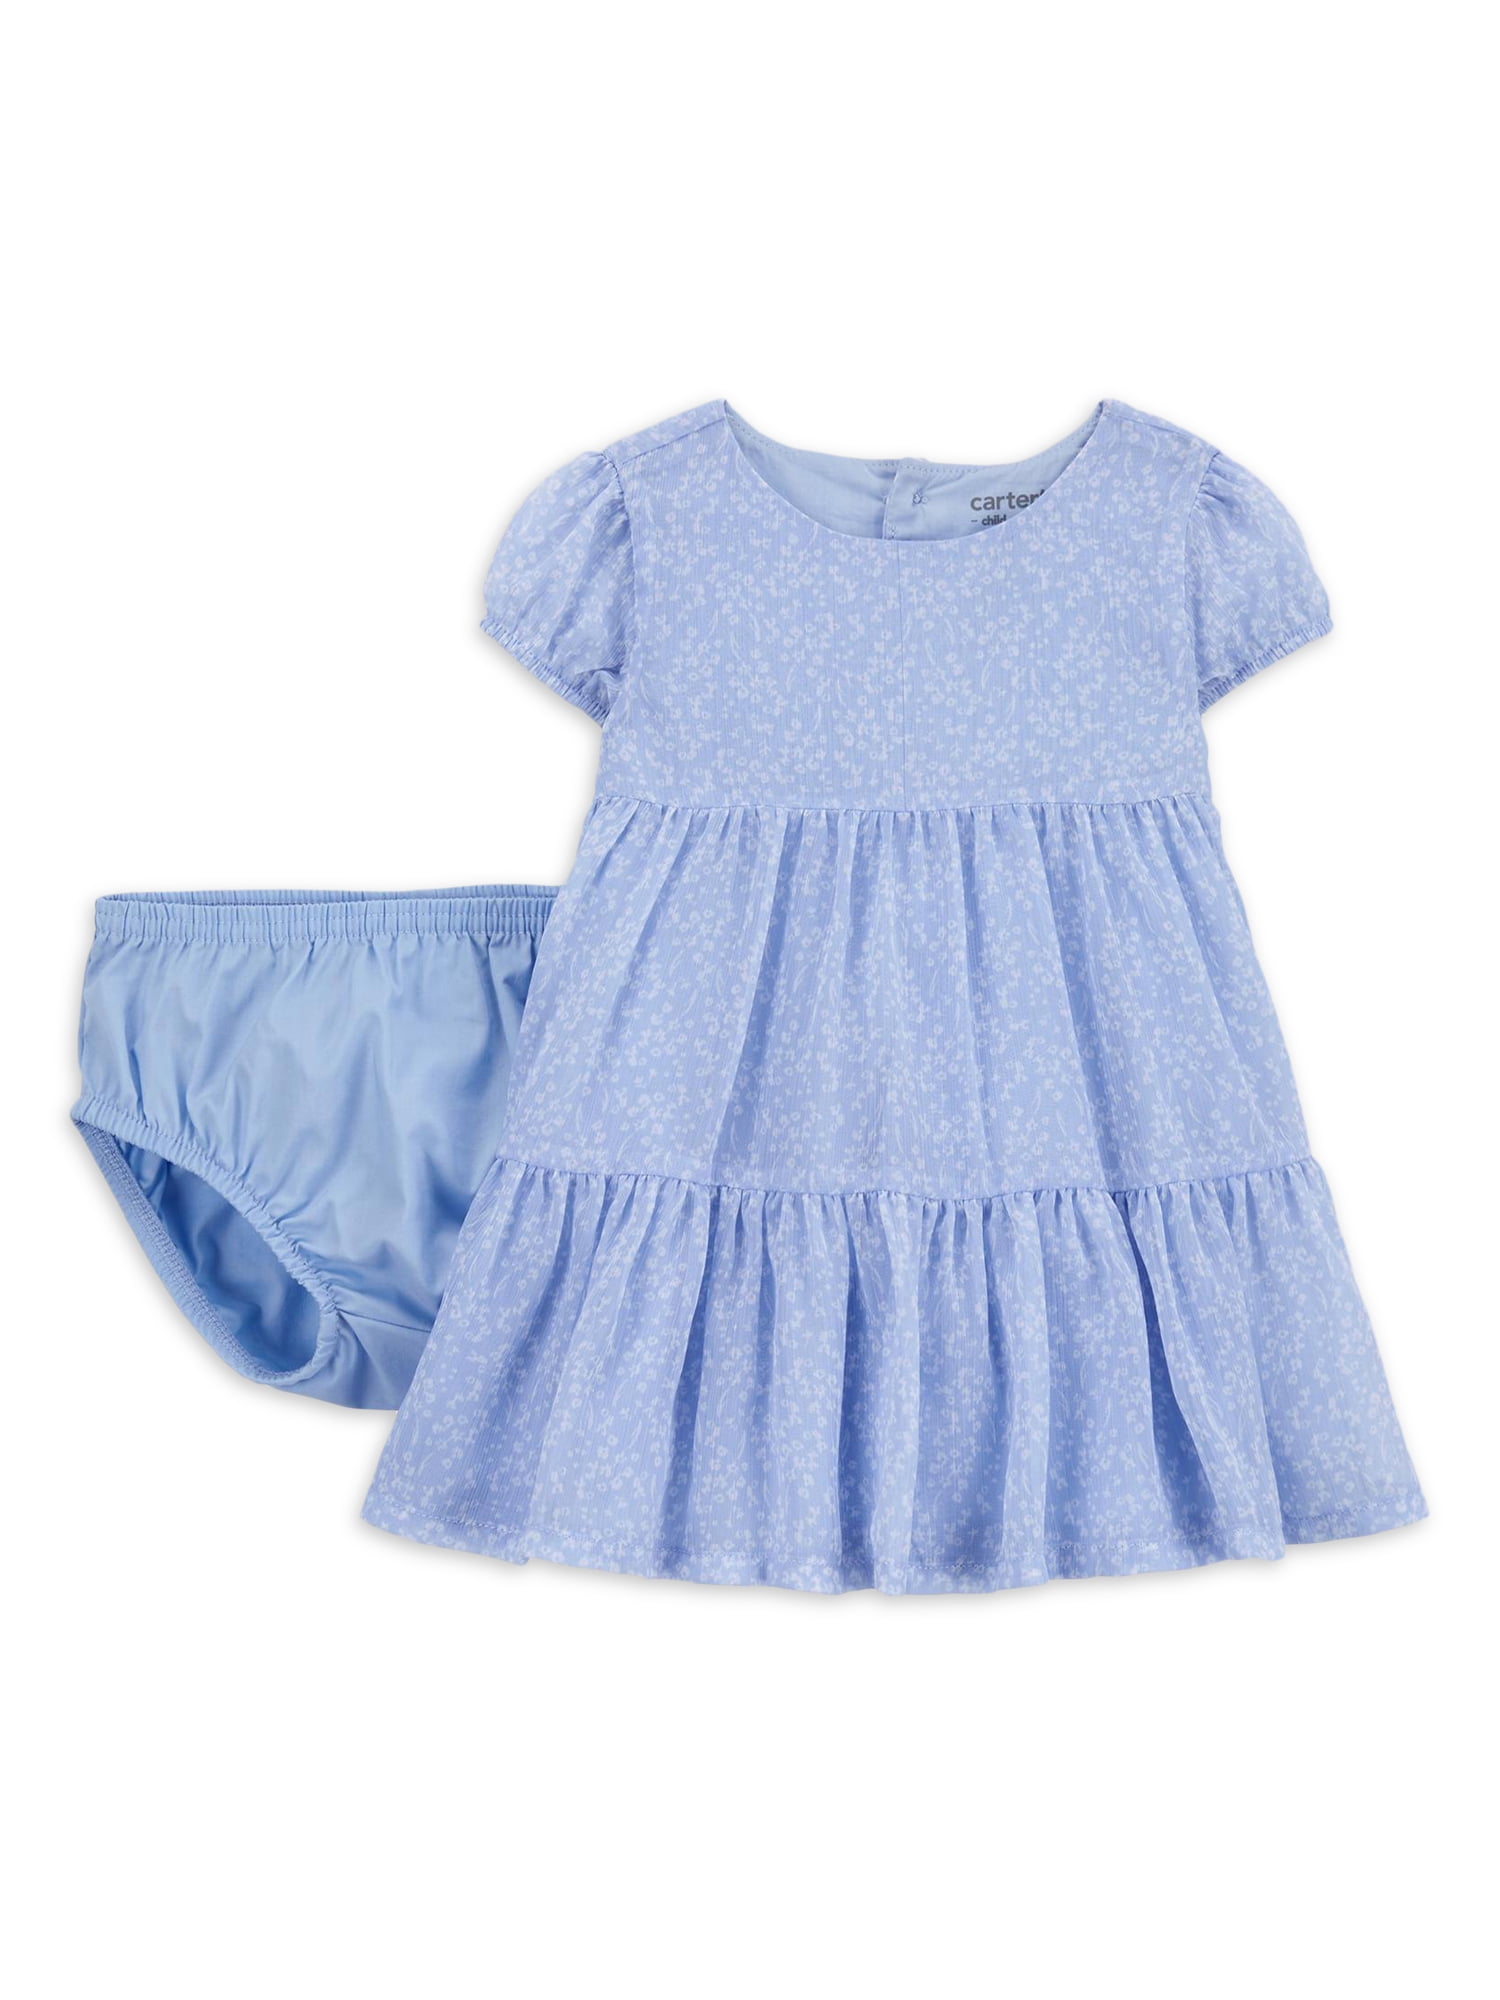 SYNPOS Infant Baby Girl Clothes Summer Baby Girl Dress Cute Tutu Baby Dress  Outfits 2-3 Years - Walmart.com